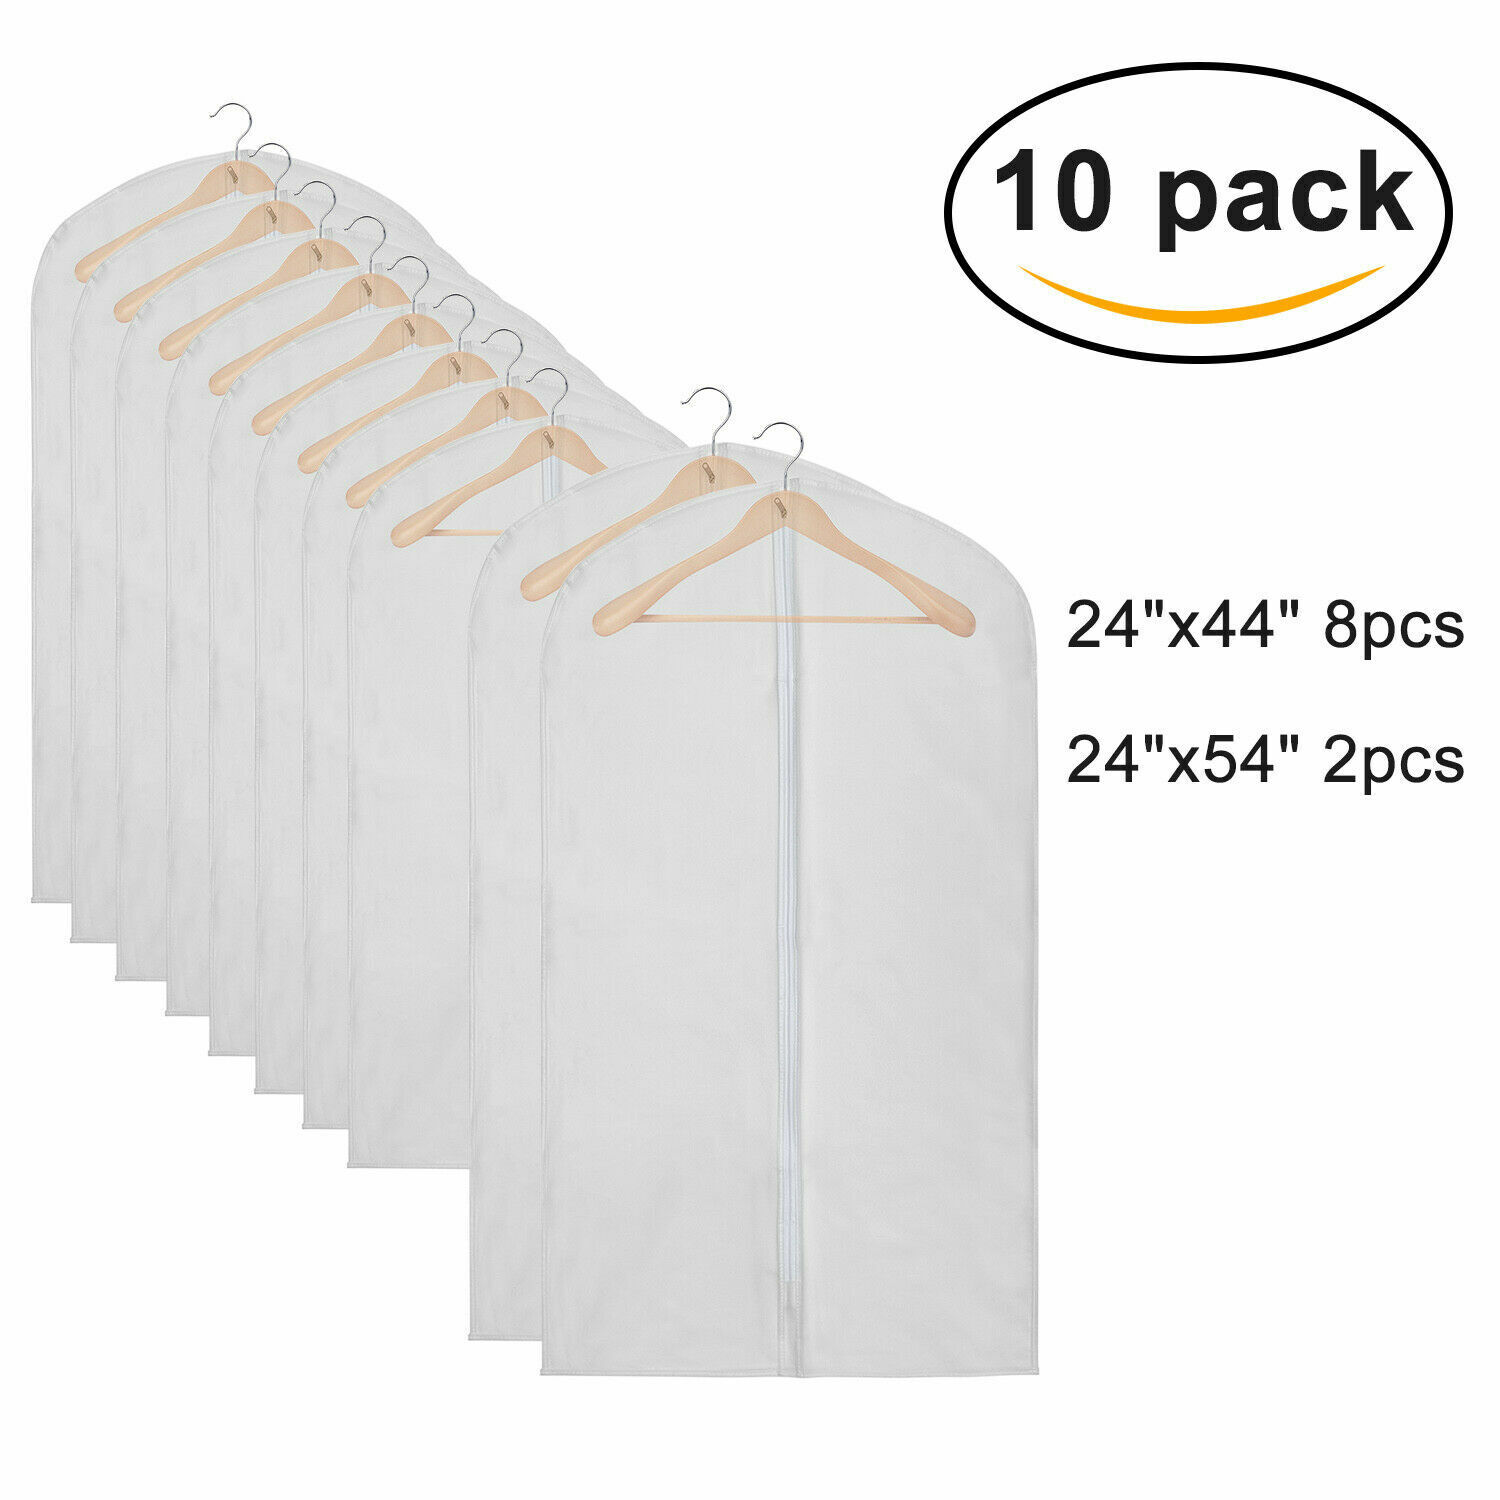 Breathable Garment Bags Suit Coats Dress Dust Proof Protector Full Zipper Cover